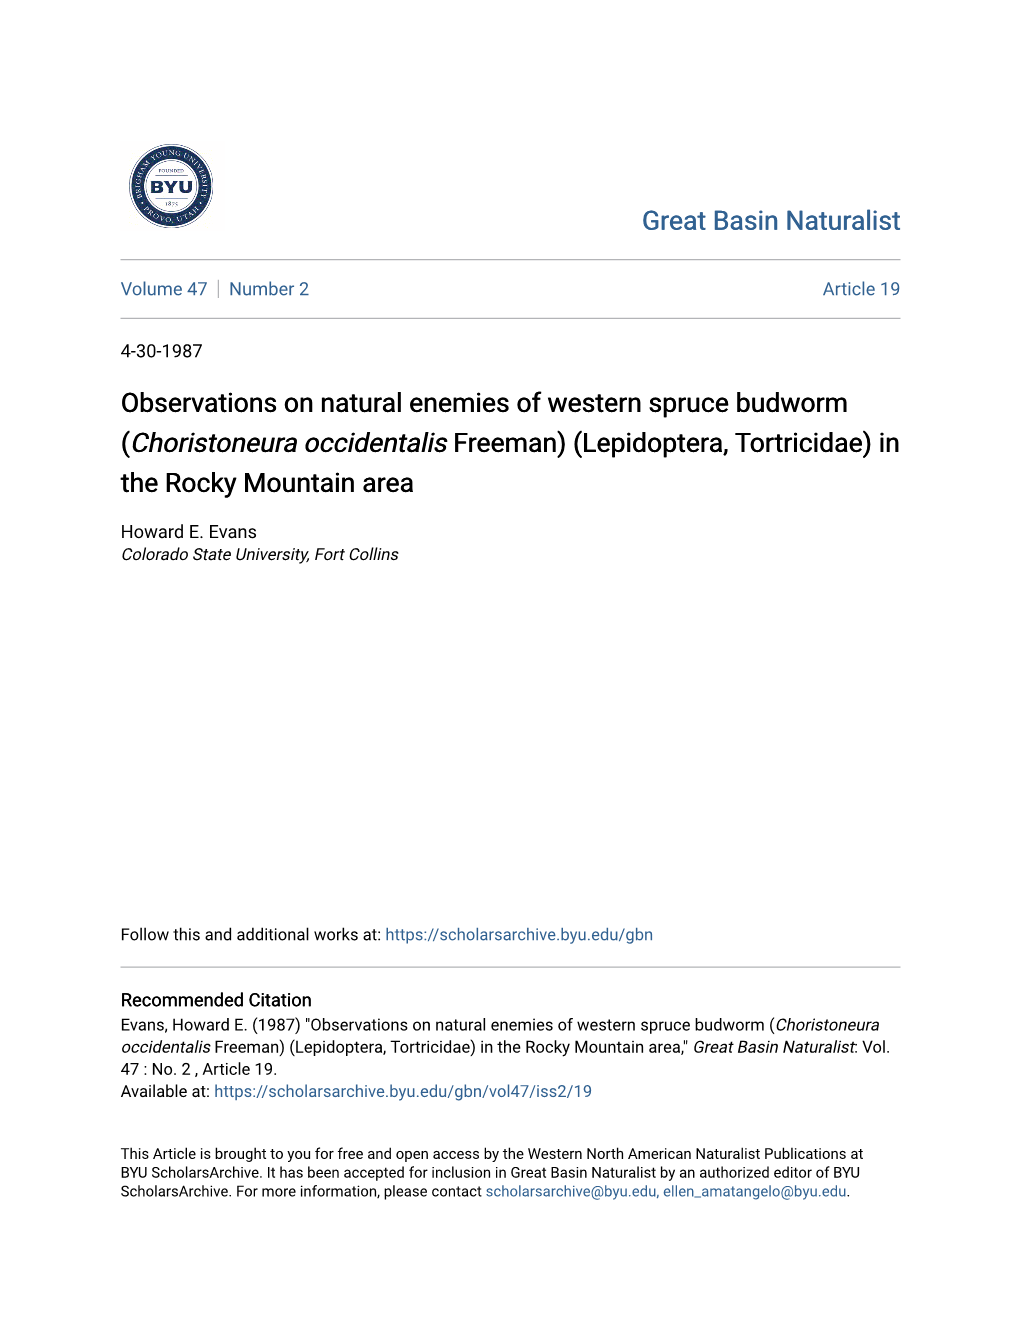 Observations on Natural Enemies of Western Spruce Budworm (Choristoneura Occidentalis Freeman) (Lepidoptera, Tortricidae) in the Rocky Mountain Area